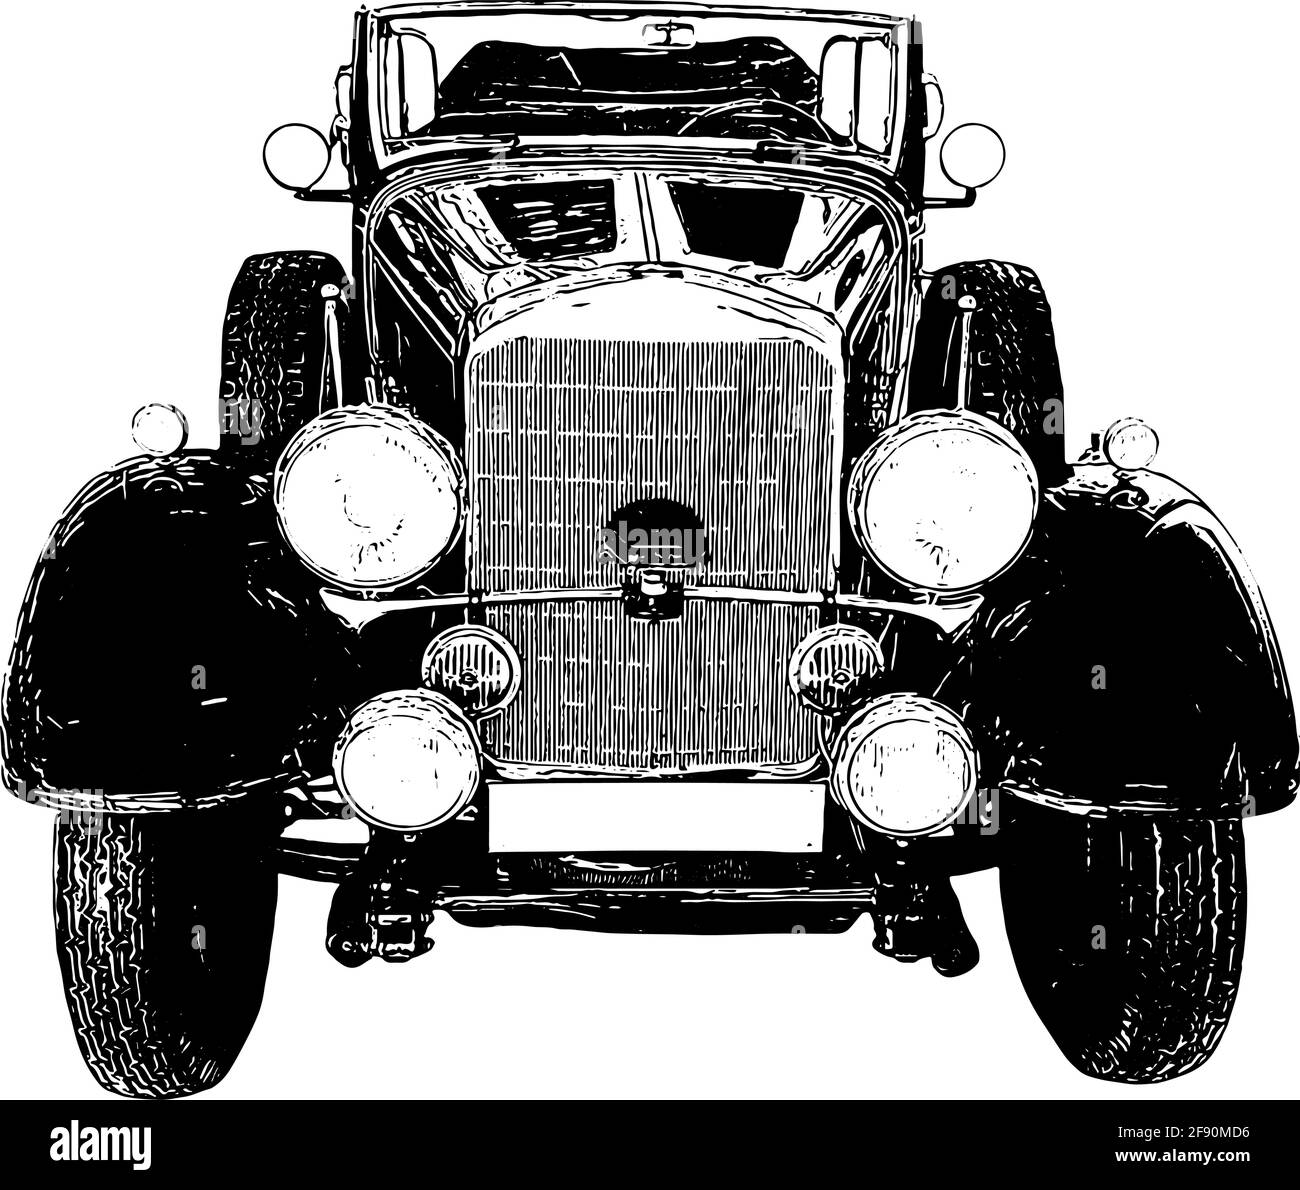 Vintage 1930s style automobile vector illustration Stock Vector